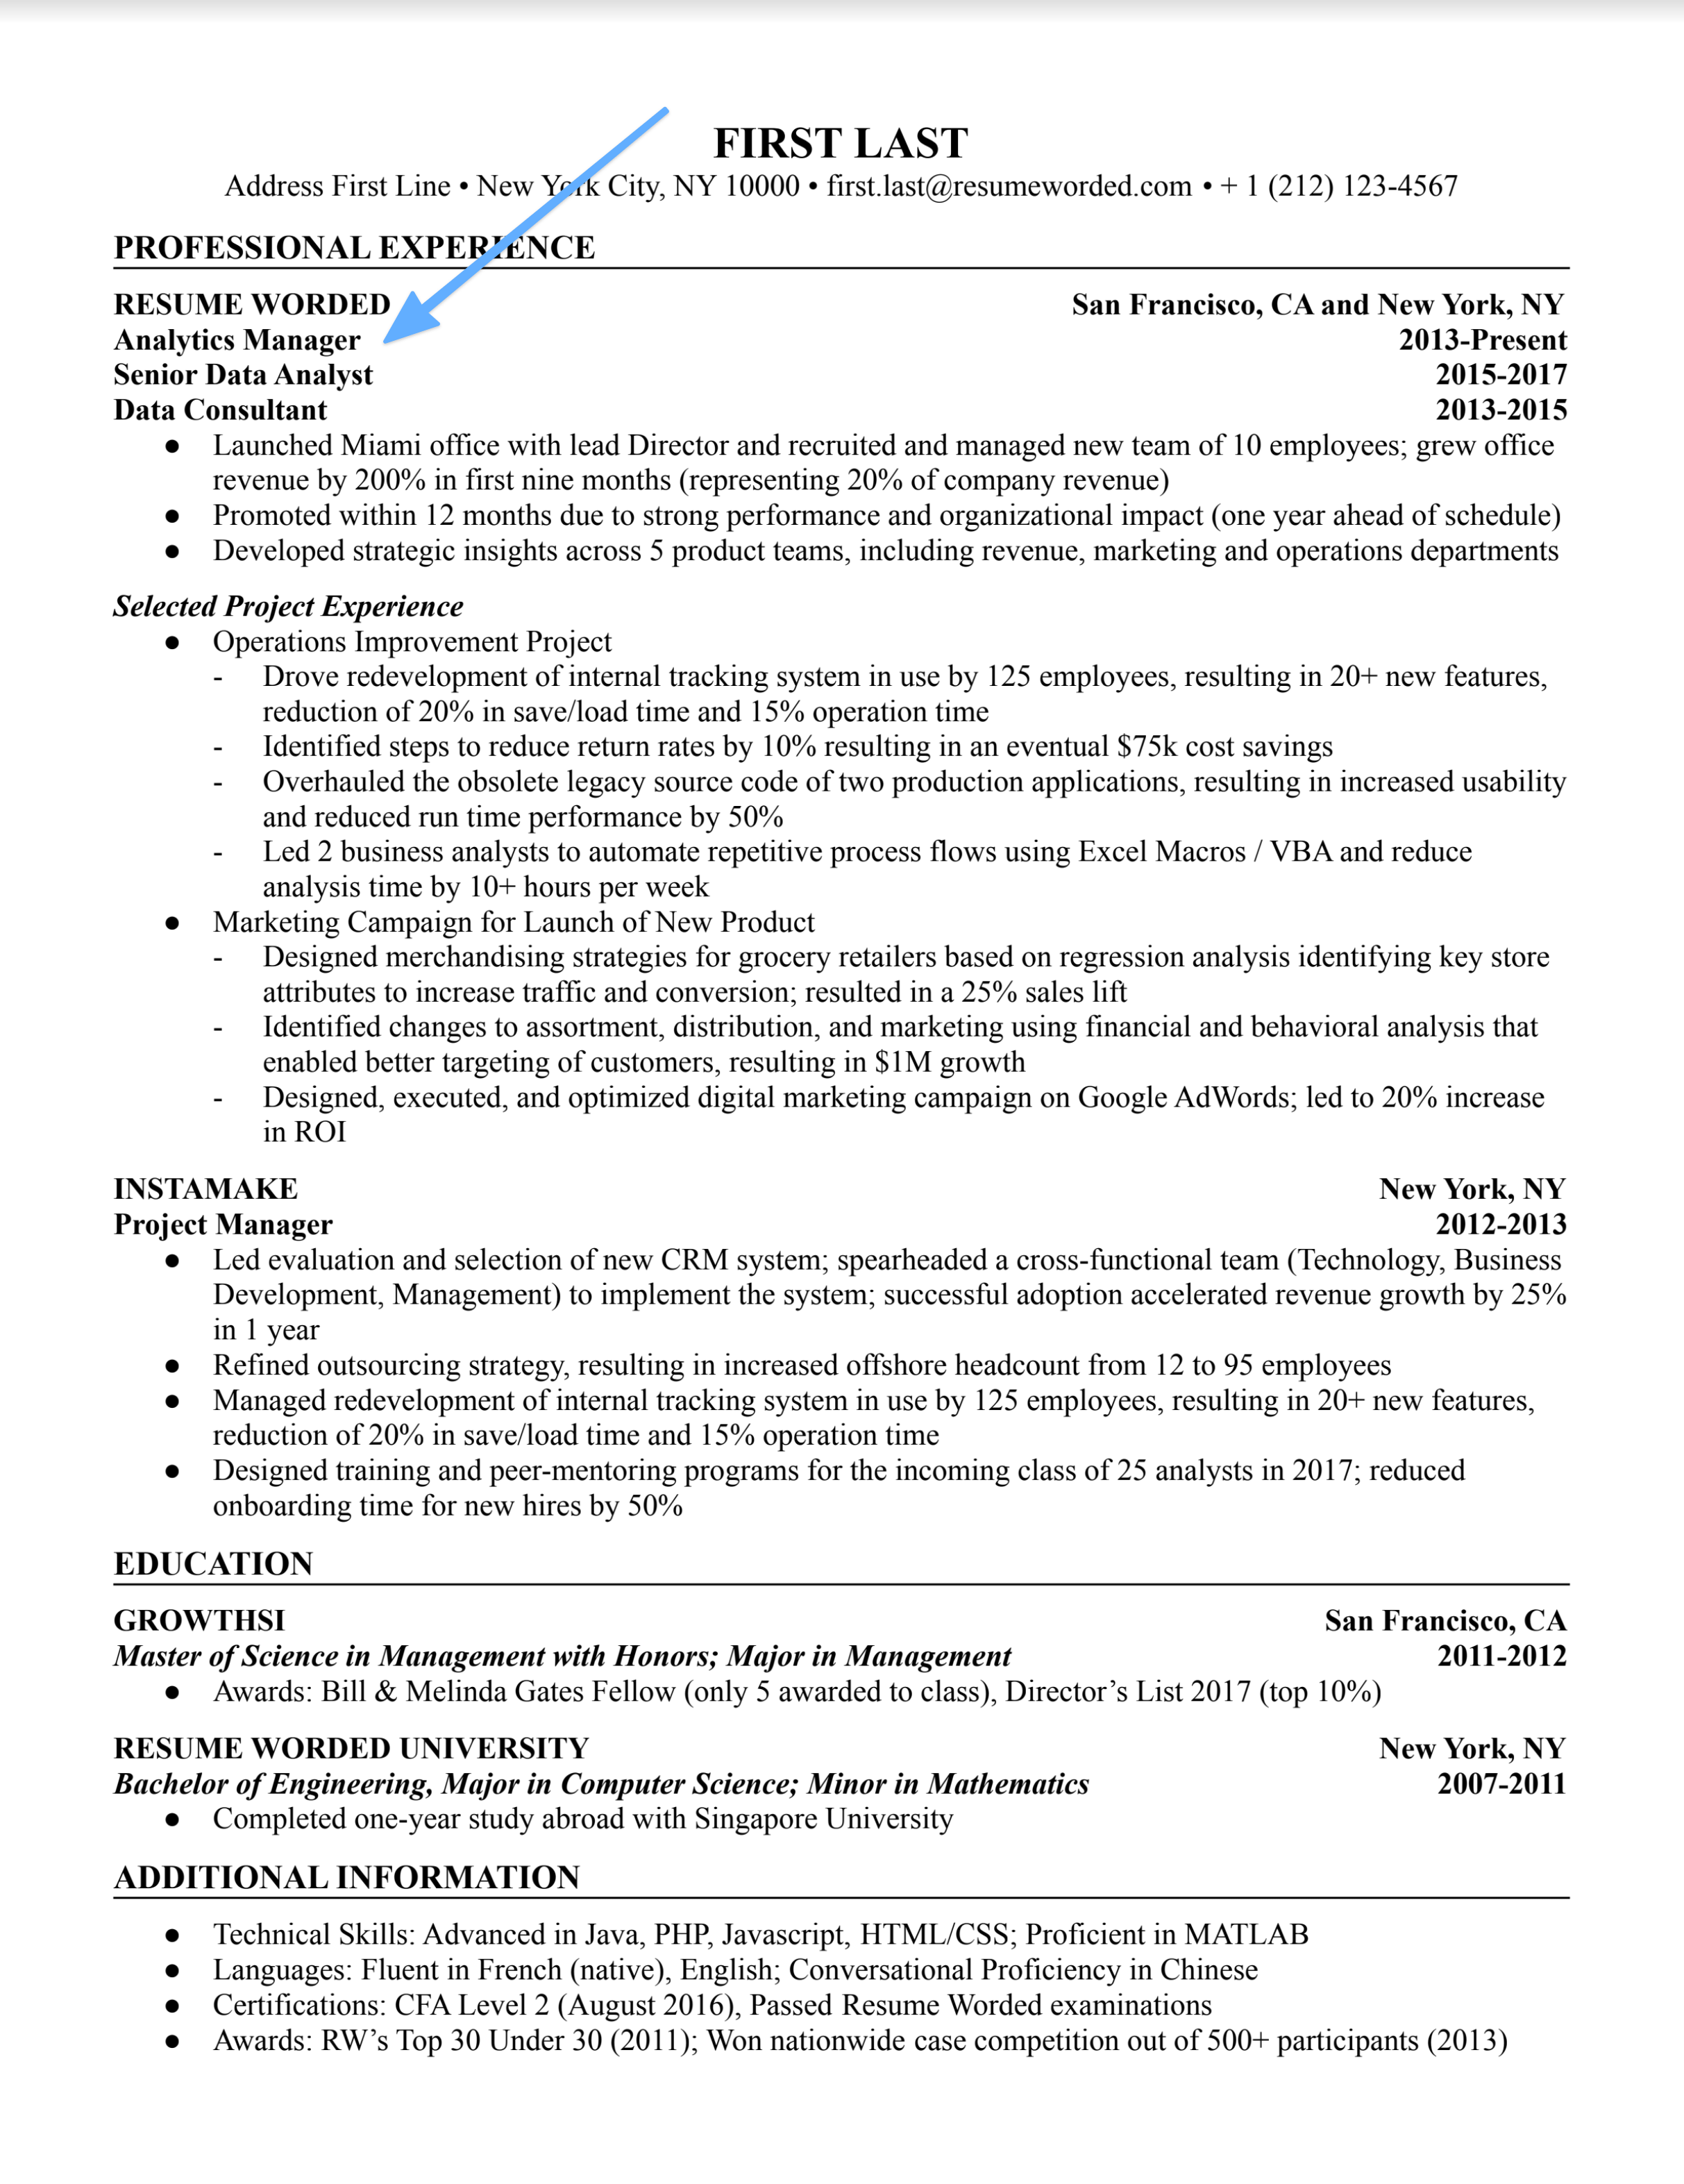 Analytics Manager resume screenshot with emphasis on data analysis skills and project management experience.